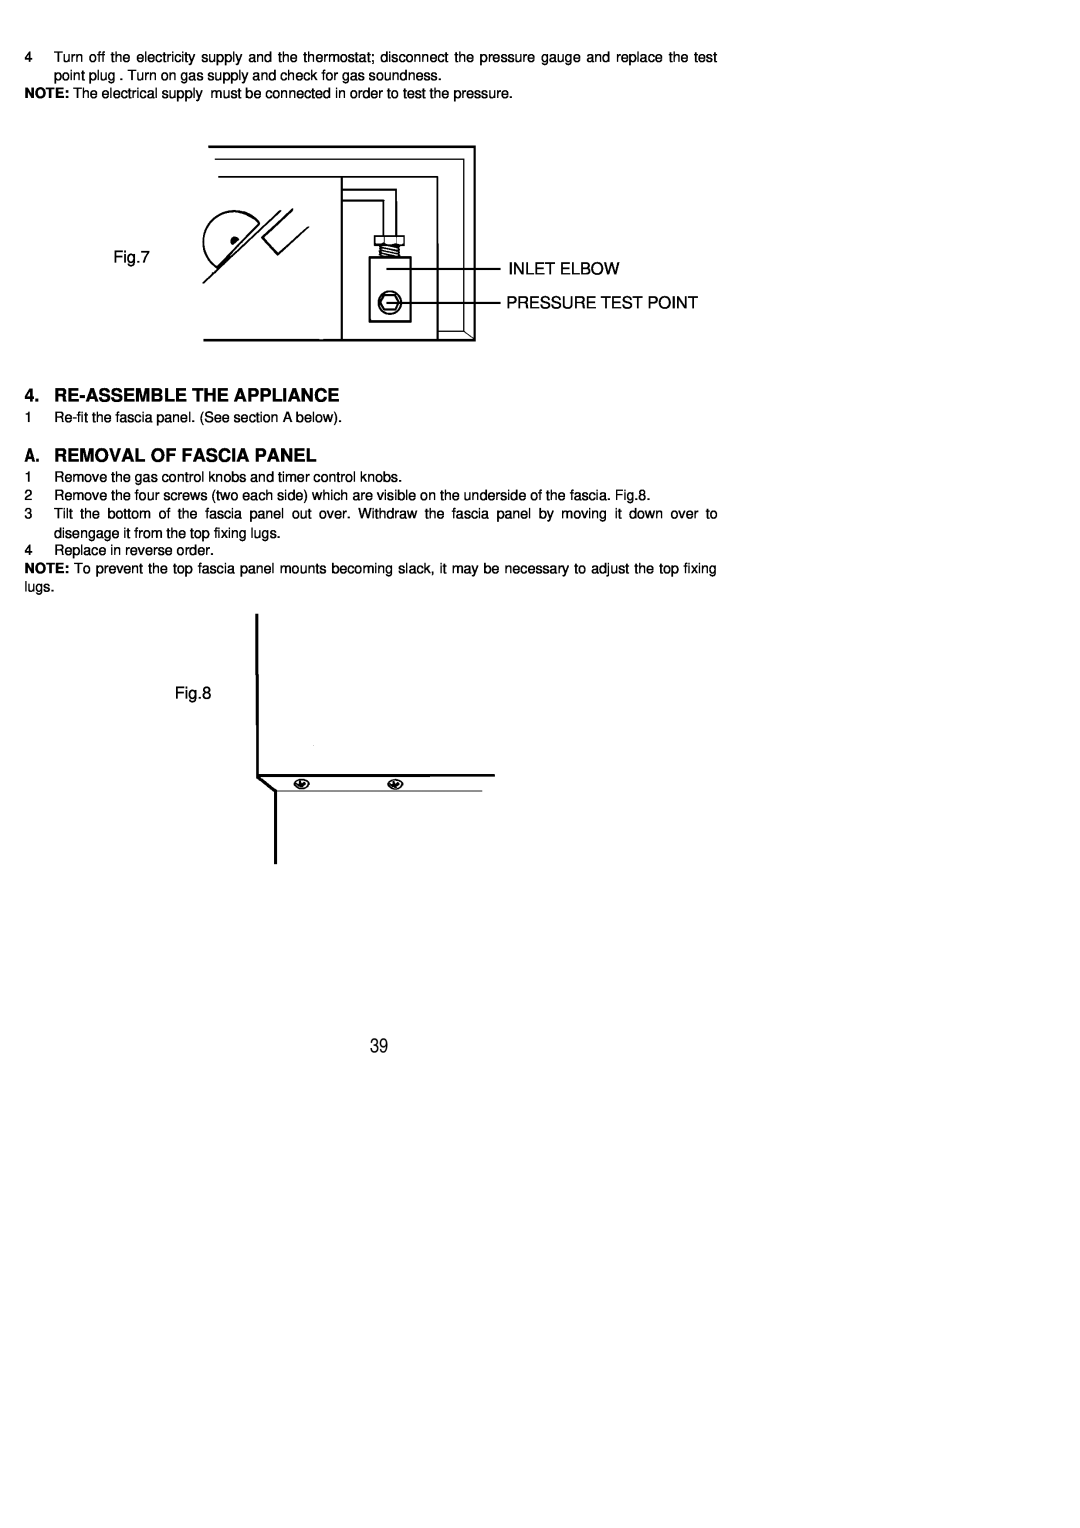 Electrolux EOG9330 manual Re-Assemblethe Appliance, A.Removal Of Fascia Panel, Inlet Elbow Pressure Test Point 